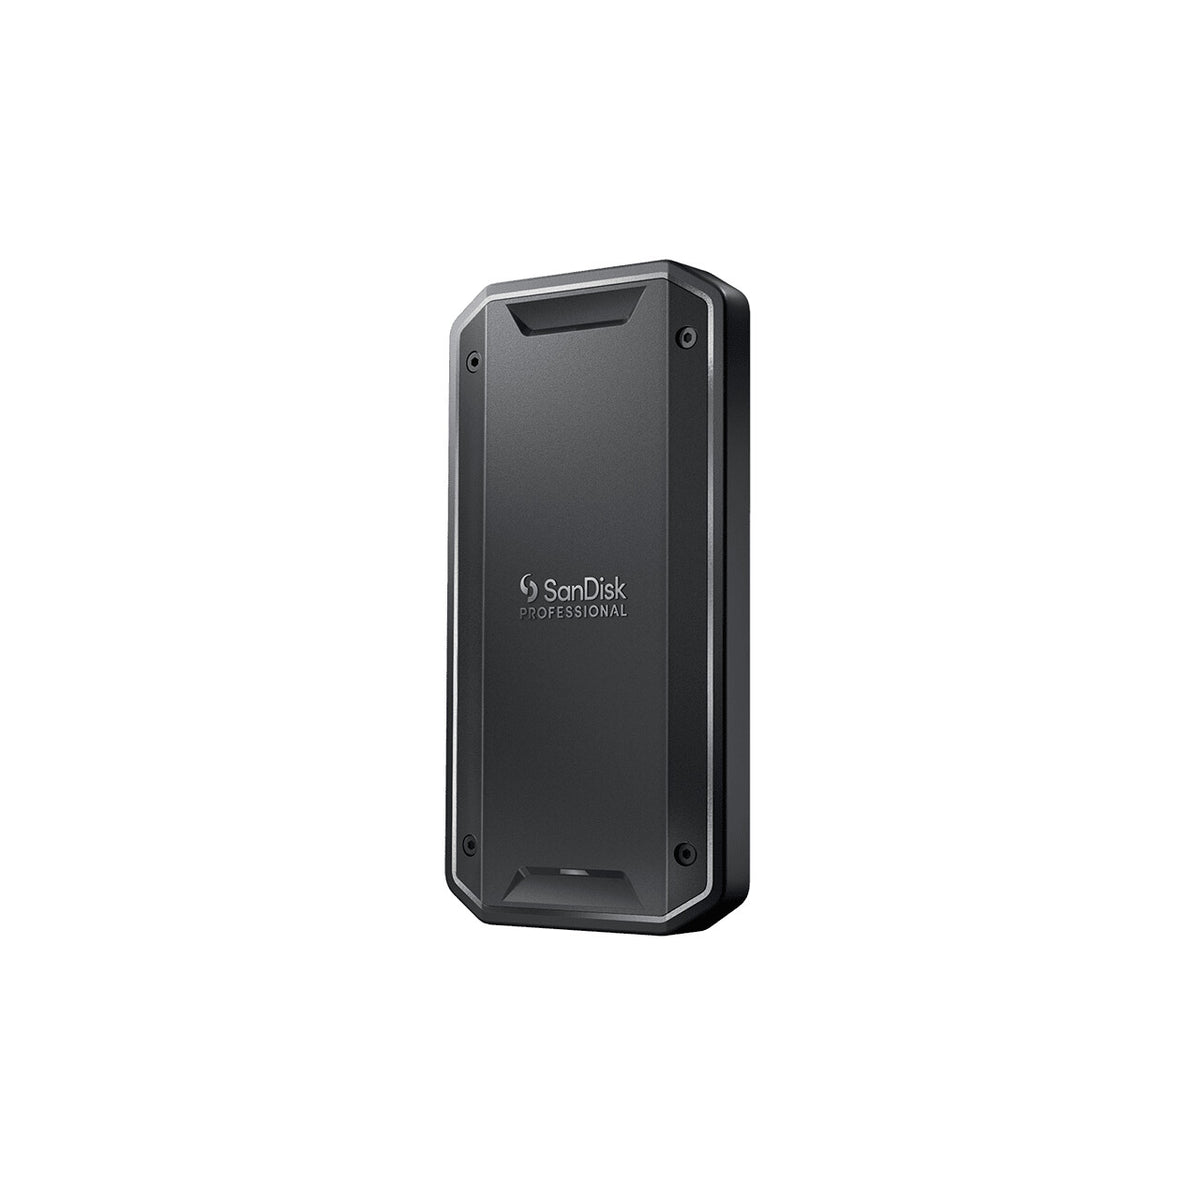 SanDisk PRO-G40 External solid state drive - 2 TB